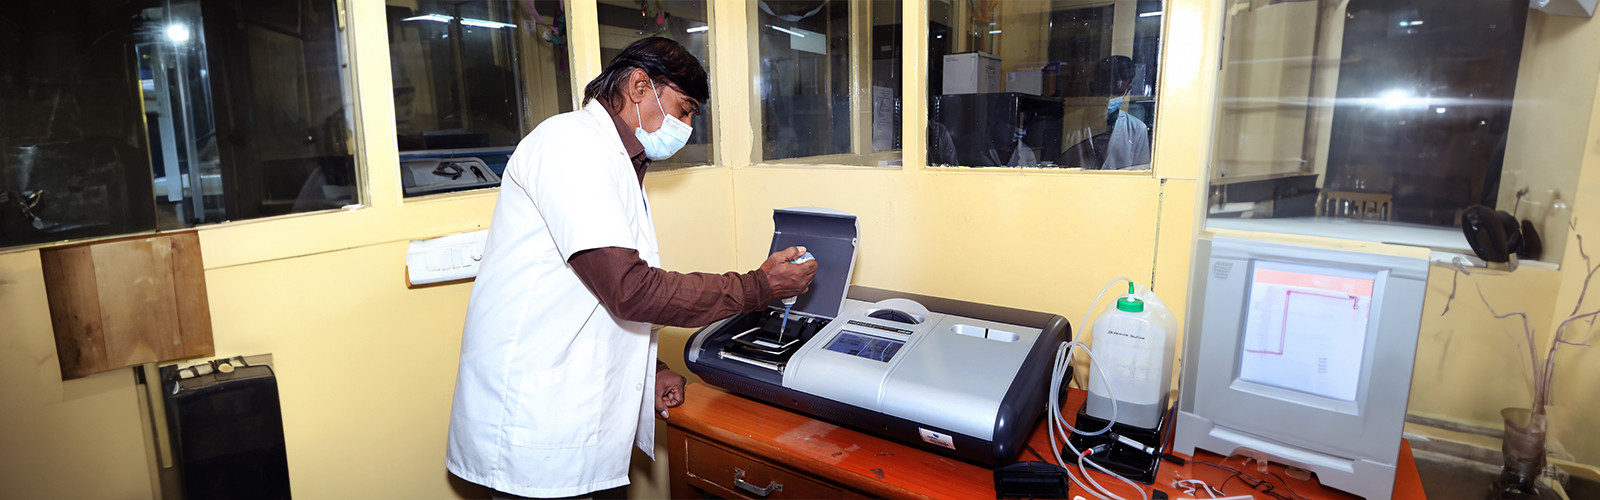 medical researcher testing something using a machine